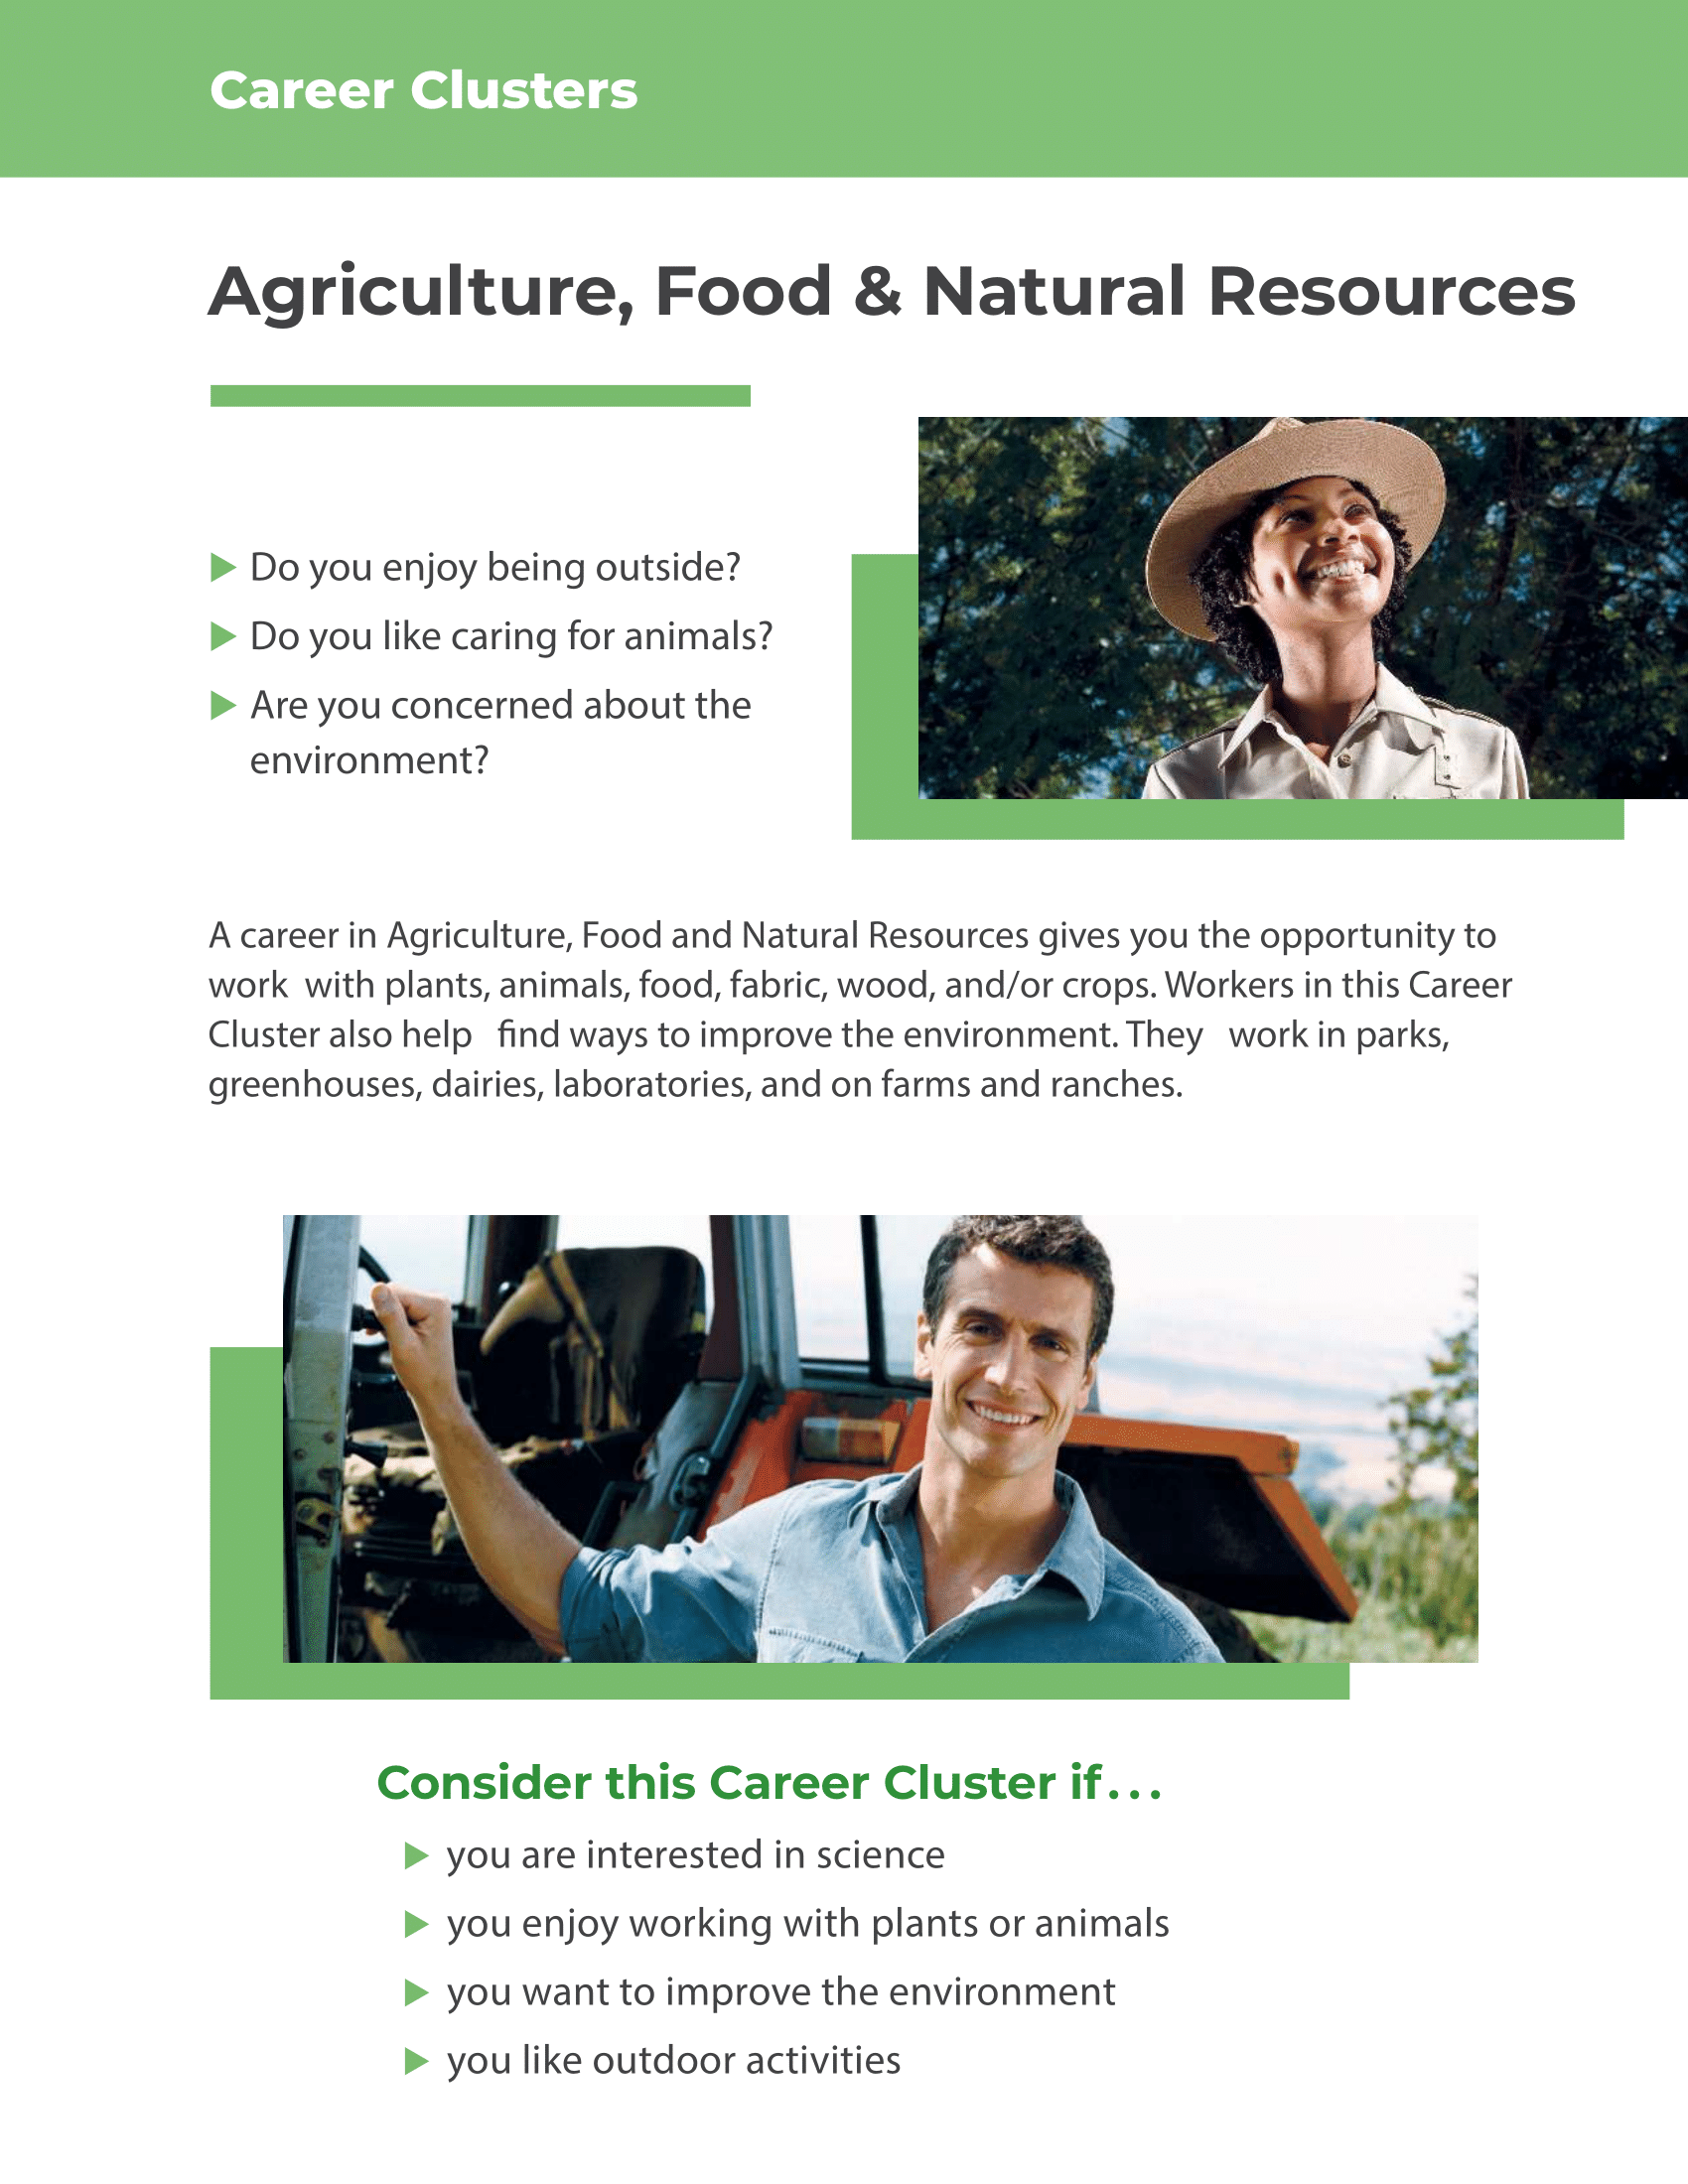 Career Clusters - Agriculture, Food, and Natural Resources